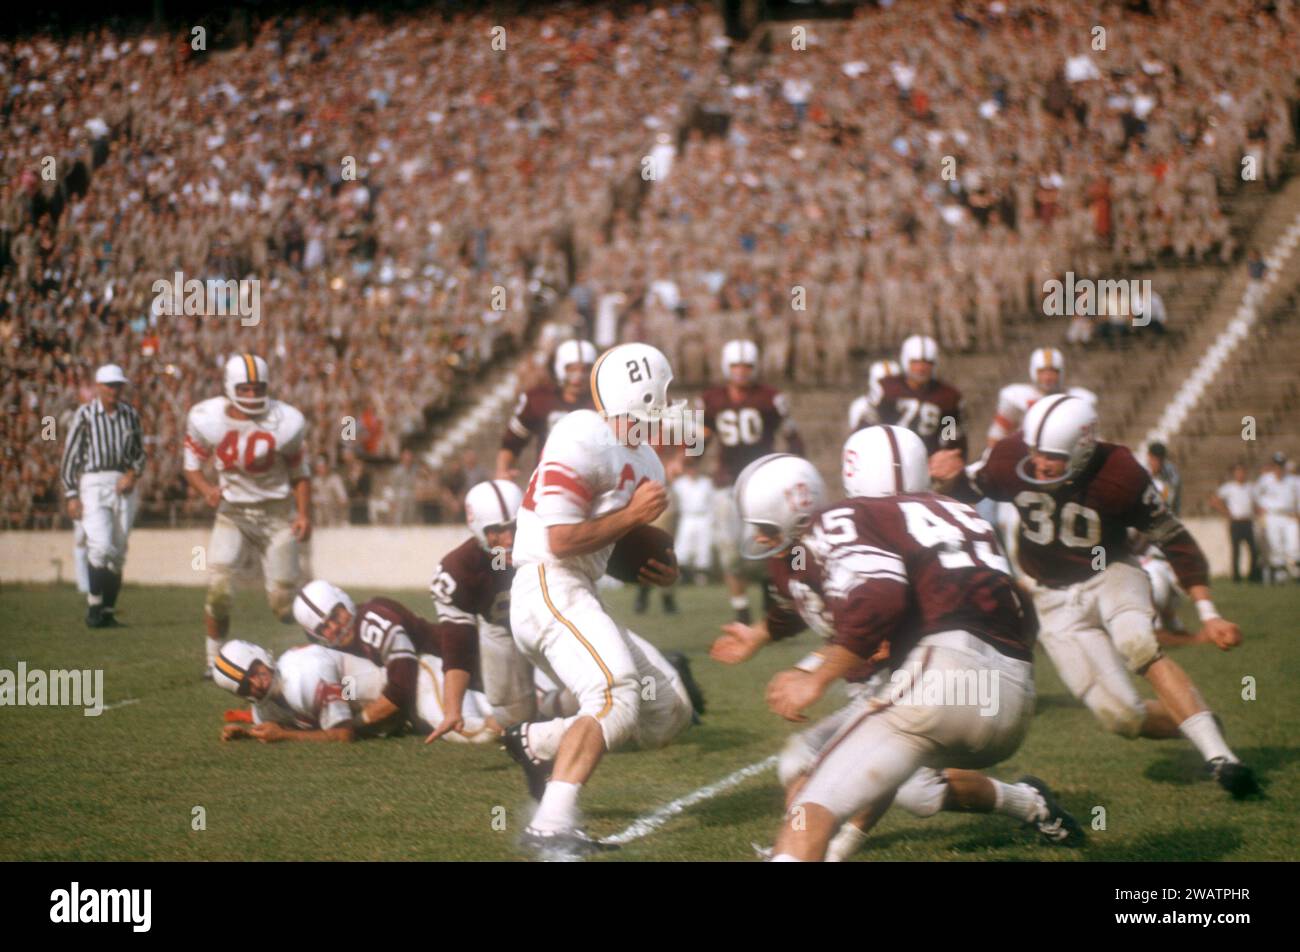 DALLAS, TX - SEPTEMBER 21:  General view of players from the #2 ranked Texas A&M Aggies playing against the Maryland Terrapins on September 21, 1957 at the Cotton Bowl in Dallas, Texas.  The Aggies defetead the Terrapins 21-13.  (Photo by Hy Peskin) Stock Photo